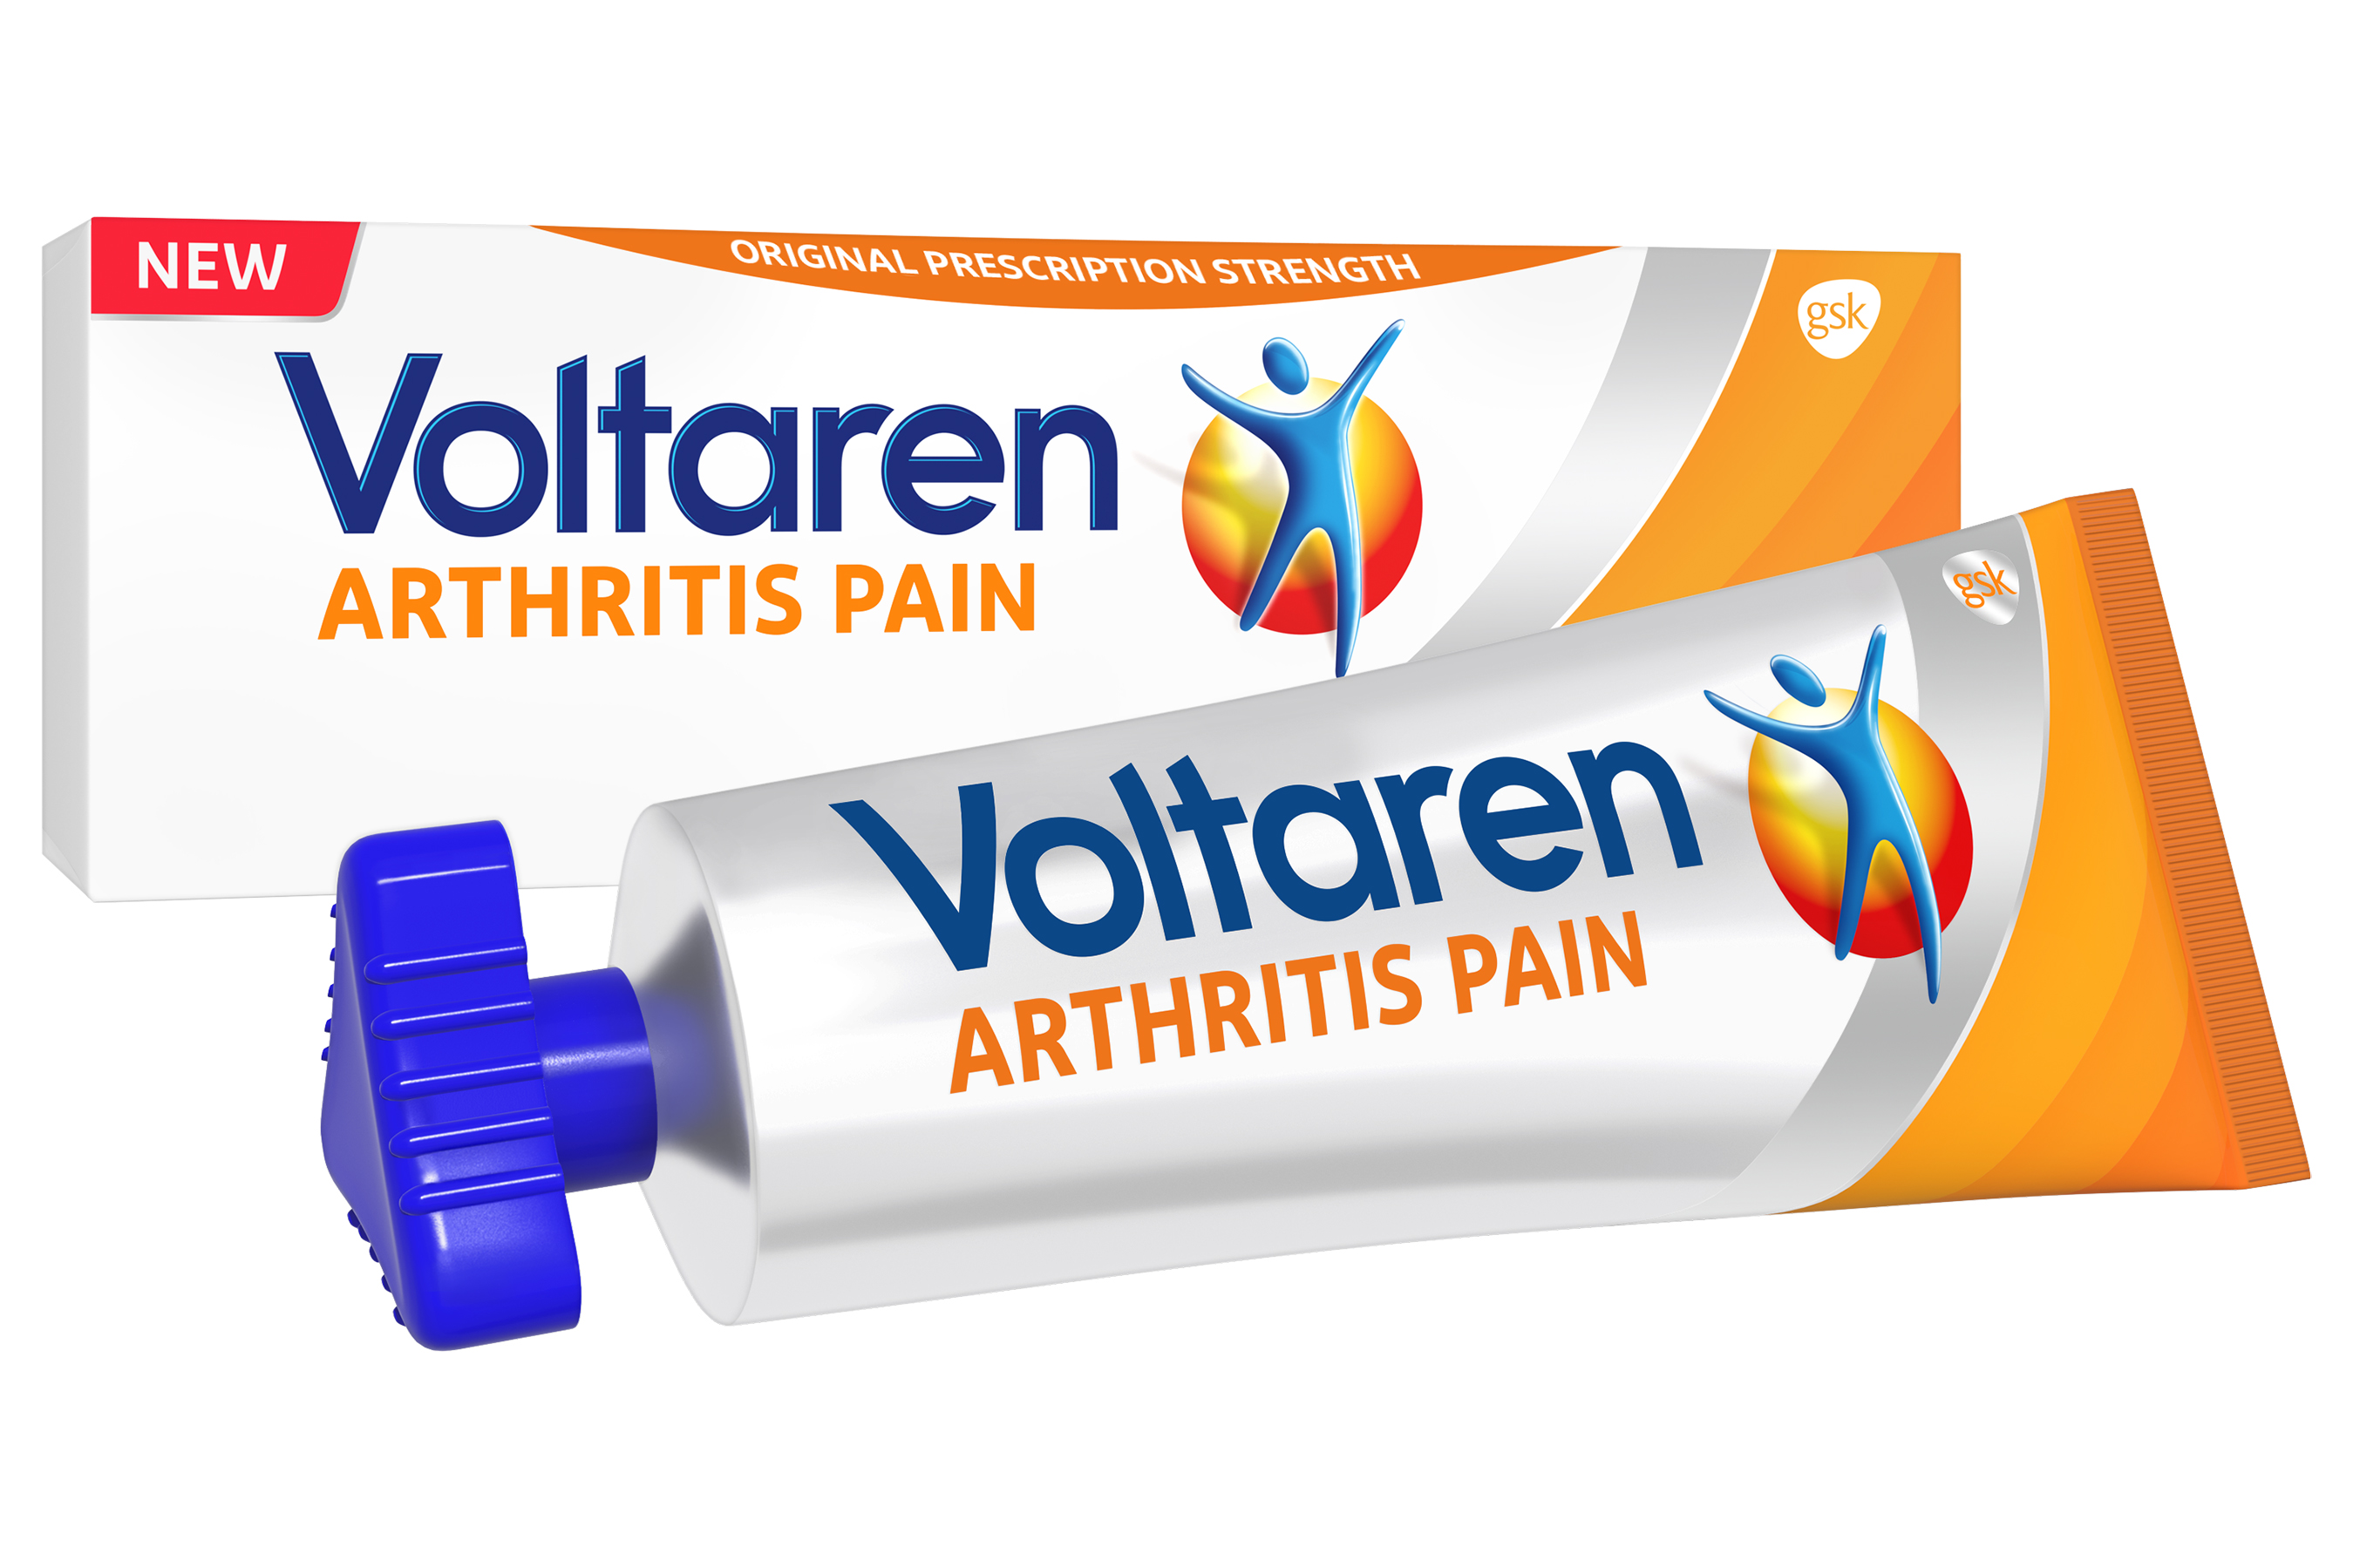 Voltaren Arthritis Pain Gel (diclofenac sodium topical gel, 1% (NSAID) arthritis pain reliever) available over-the-counter (OTC) online and in stores nationwide.